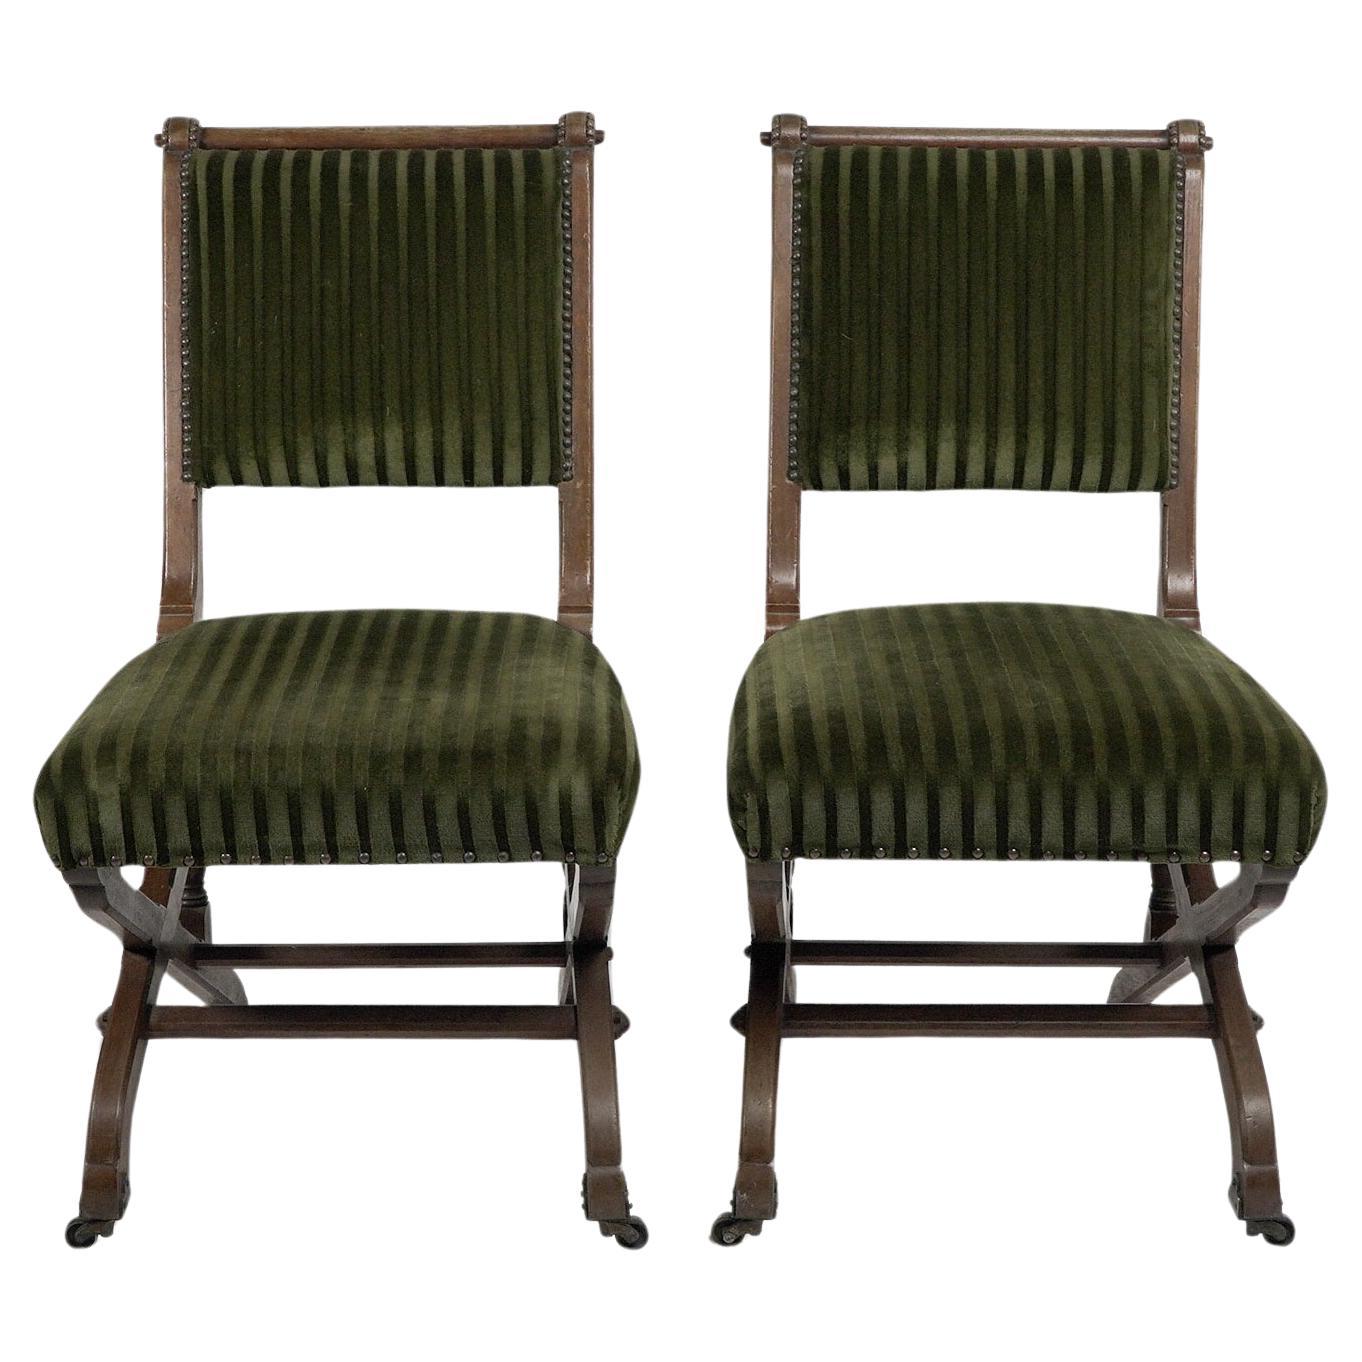 Charles Bevan under licence to Marsh Jones & Cribb. A pair of Gothic Revival side chairs, with pegged oak frame and scissor style legs on the original decorative brass and ceramic casters. They follow the design of Bevans 'New Registered Reclining